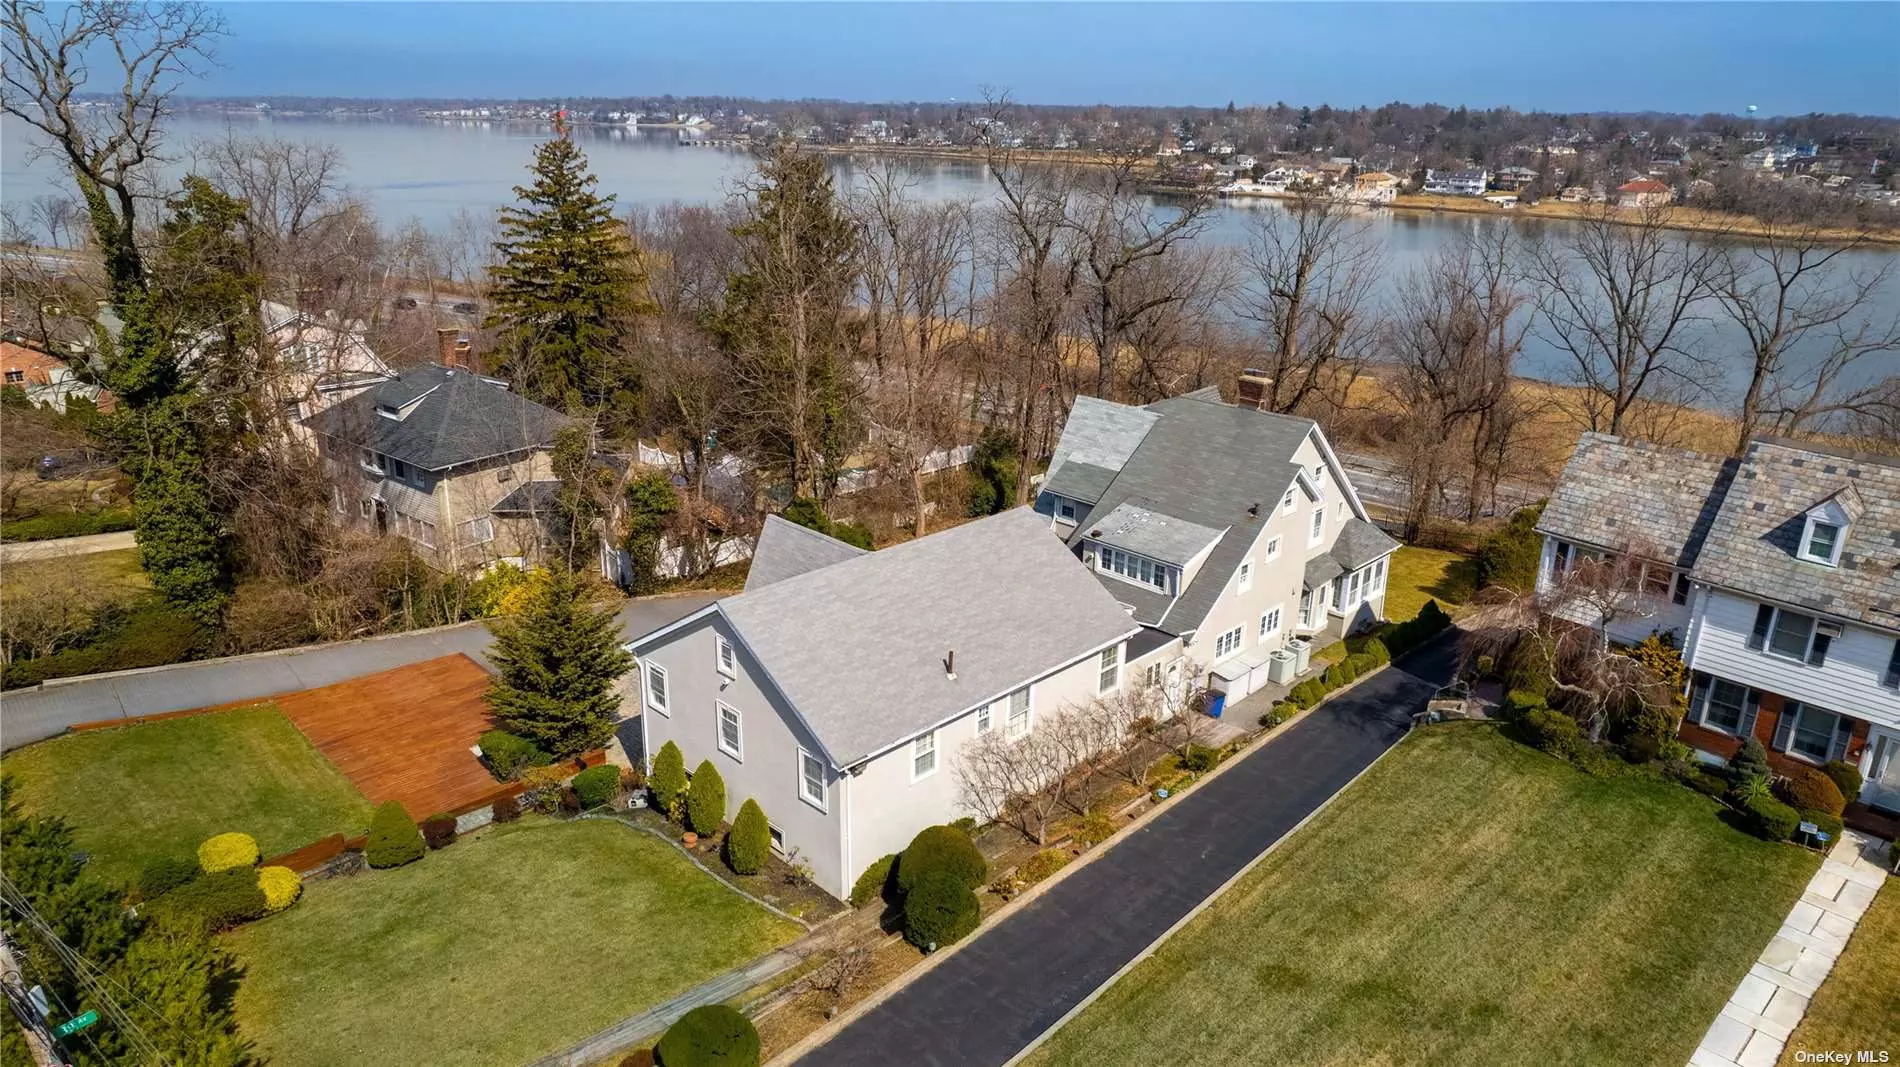 Magnificent Property On 23, 000 Square Feet (103.30 x 228), Overlooking Little Neck Bay With A Legal IN-LAW SUITE (Separate Entrance) & POSSIBILITY TO SUBDIVIDE PROPERTY. Main Residence Has 3 Bedrooms, 2.5 Bathroom, EIK, Living Room, Dining Room, Sun Room & Water Views From Most Rooms; In-Law Suite Has 2 Beds, 2 Baths, Kitchen, LR/DR. 3 Car Garage. Close To All!